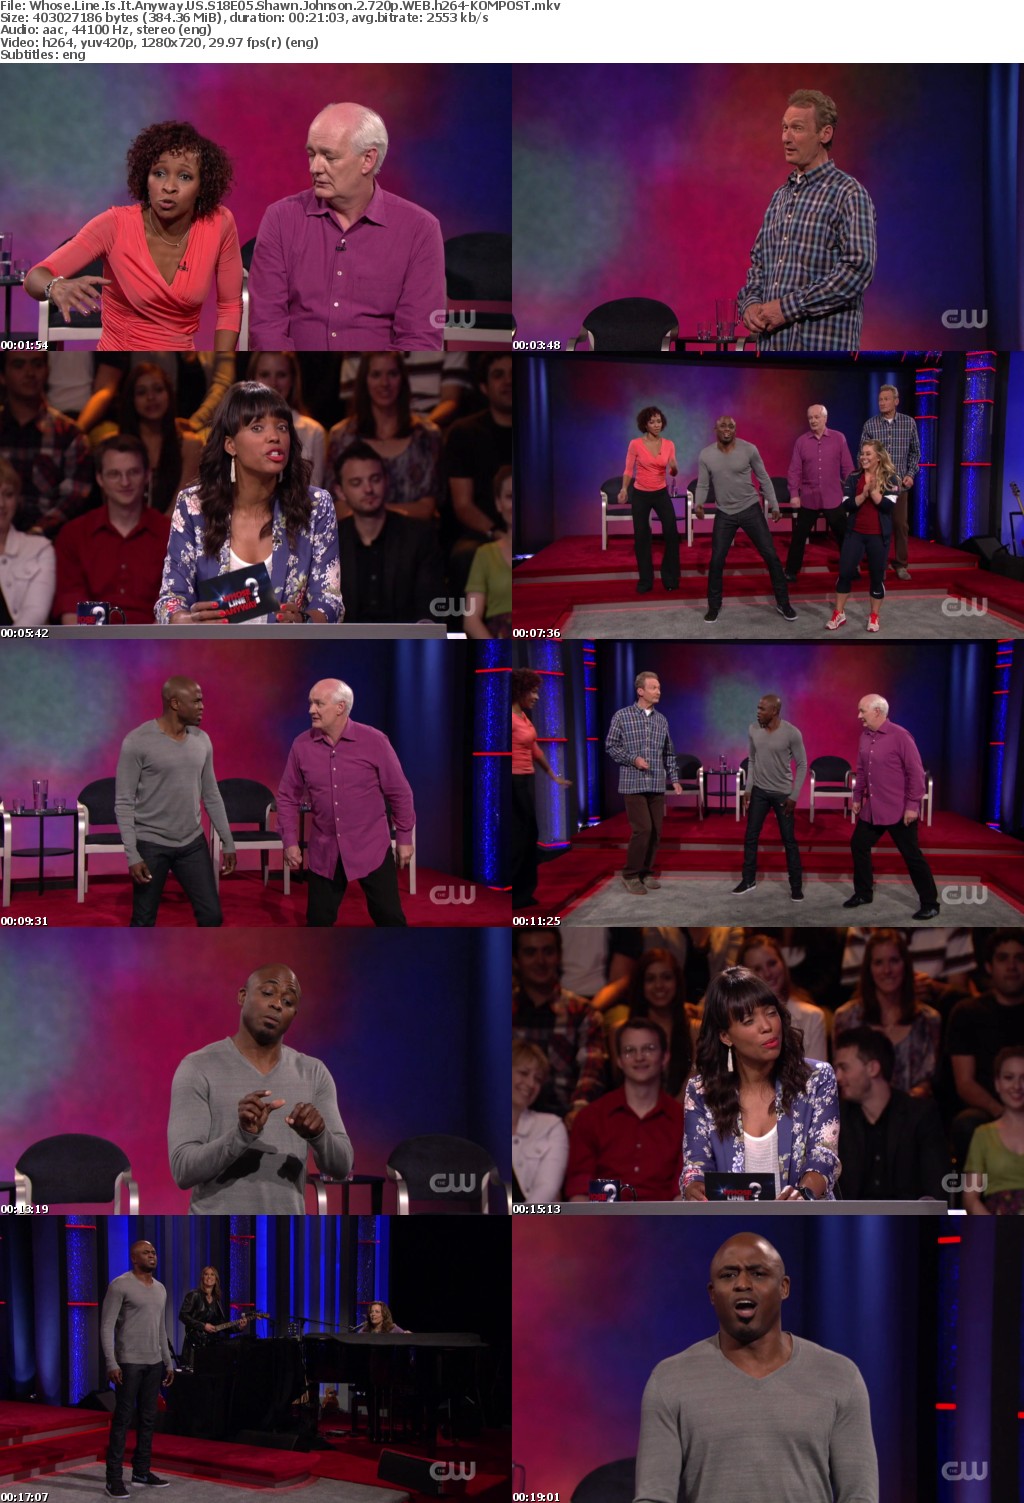 Whose Line Is It Anyway US S18E05 Shawn Johnson 2 720p WEB h264-KOMPOST